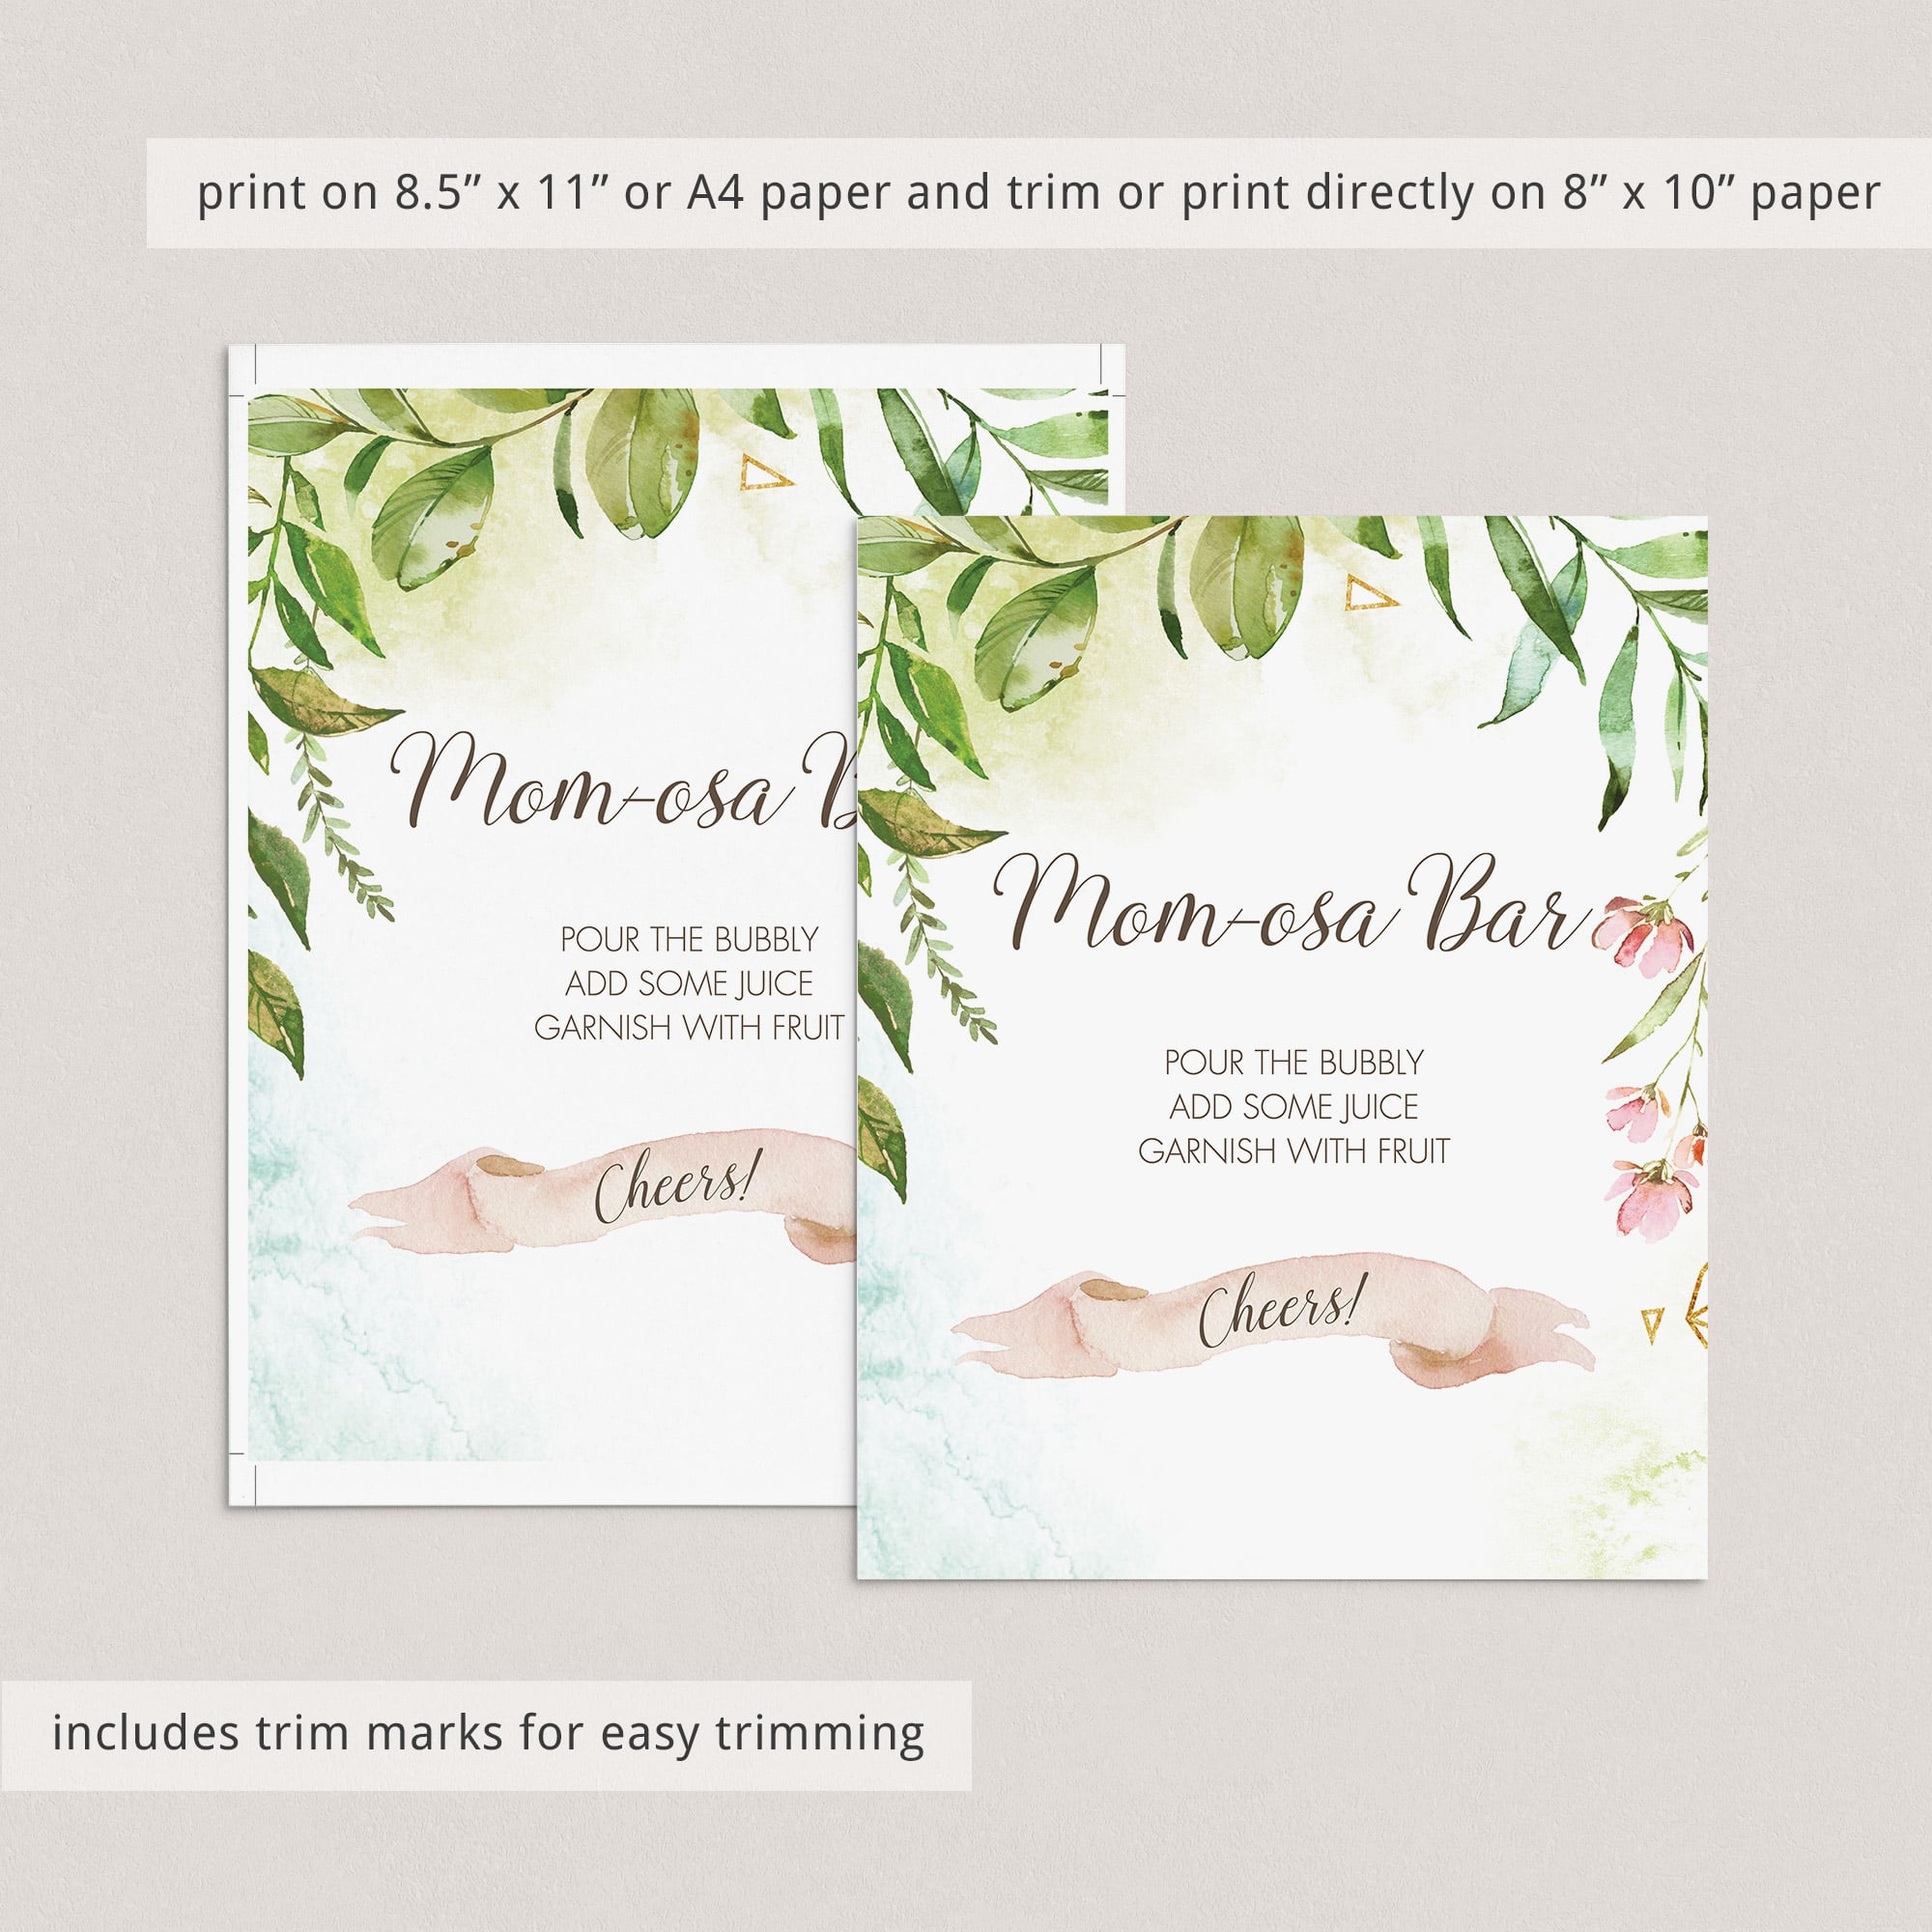 Momosa bar table sign for baby brunch greenery theme by LittleSizzle